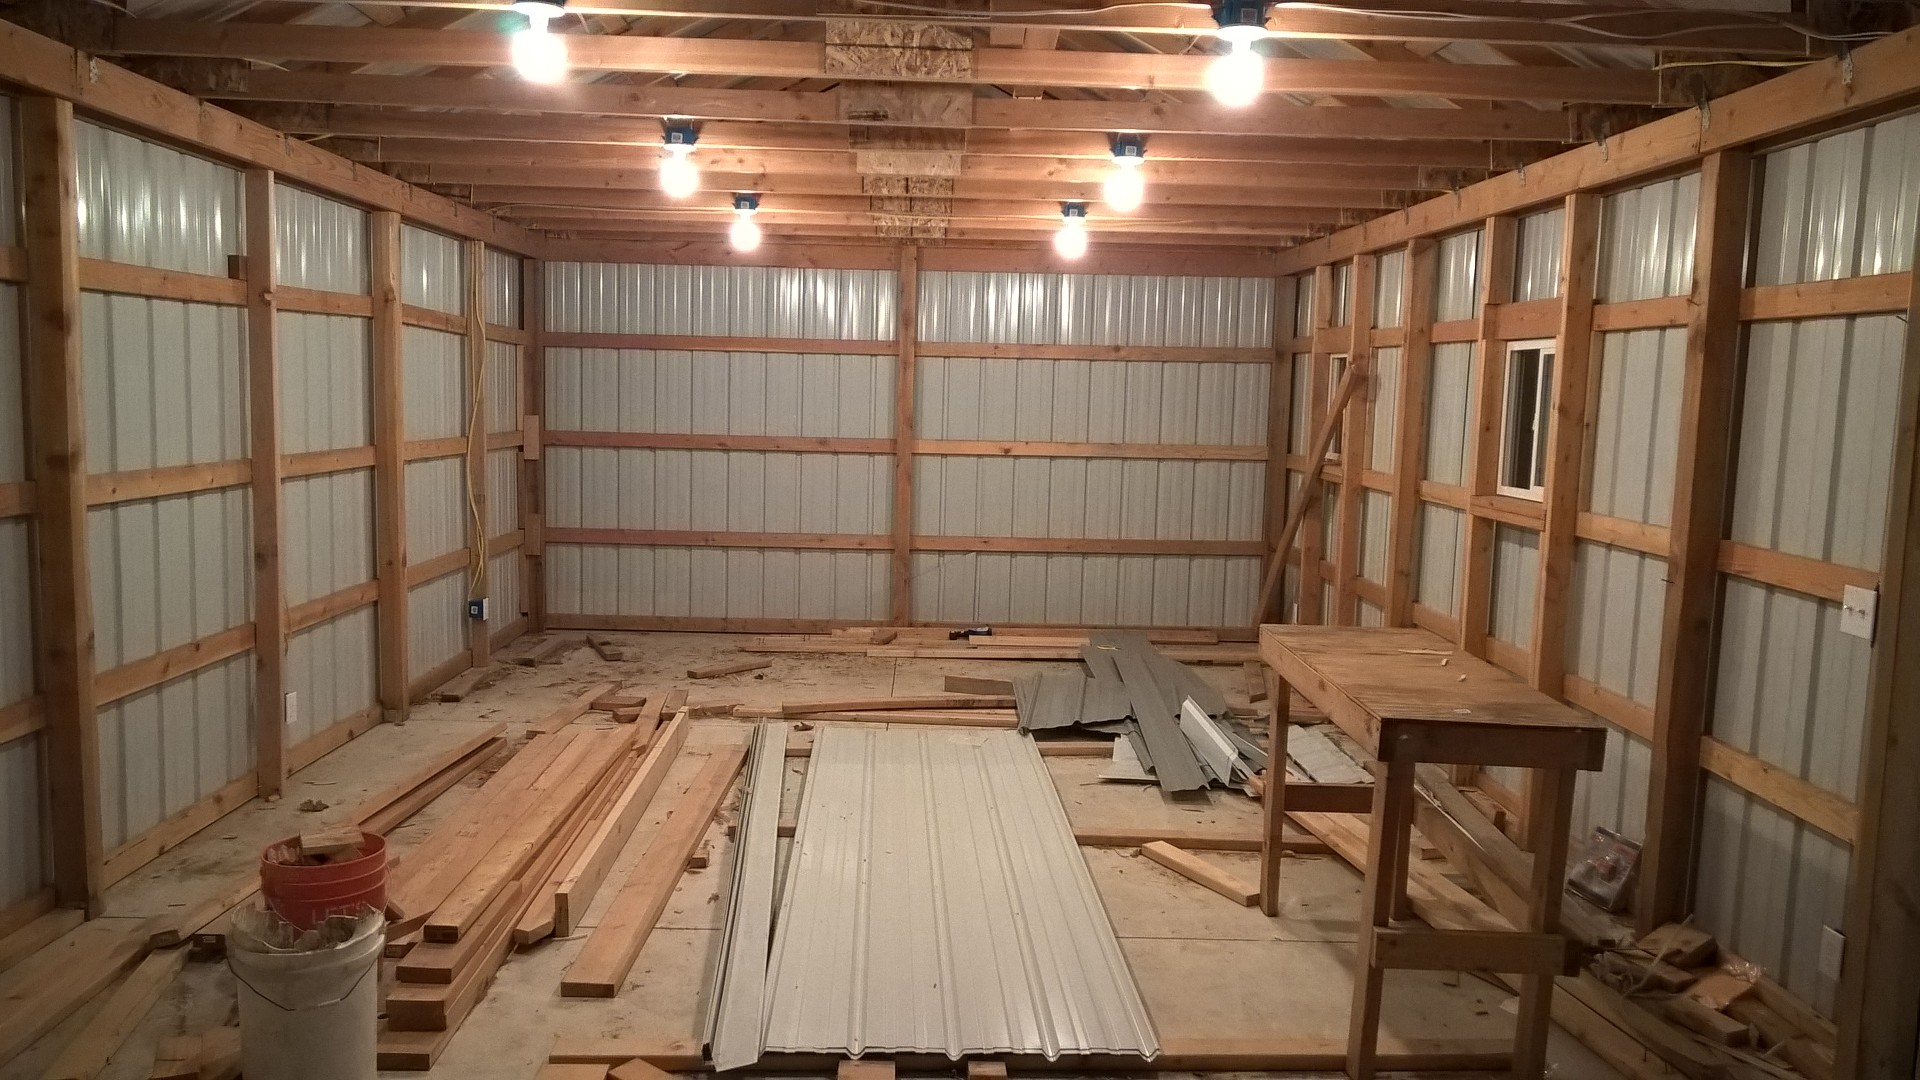 Building A Pole Barn Shed From Scratch P4 â€